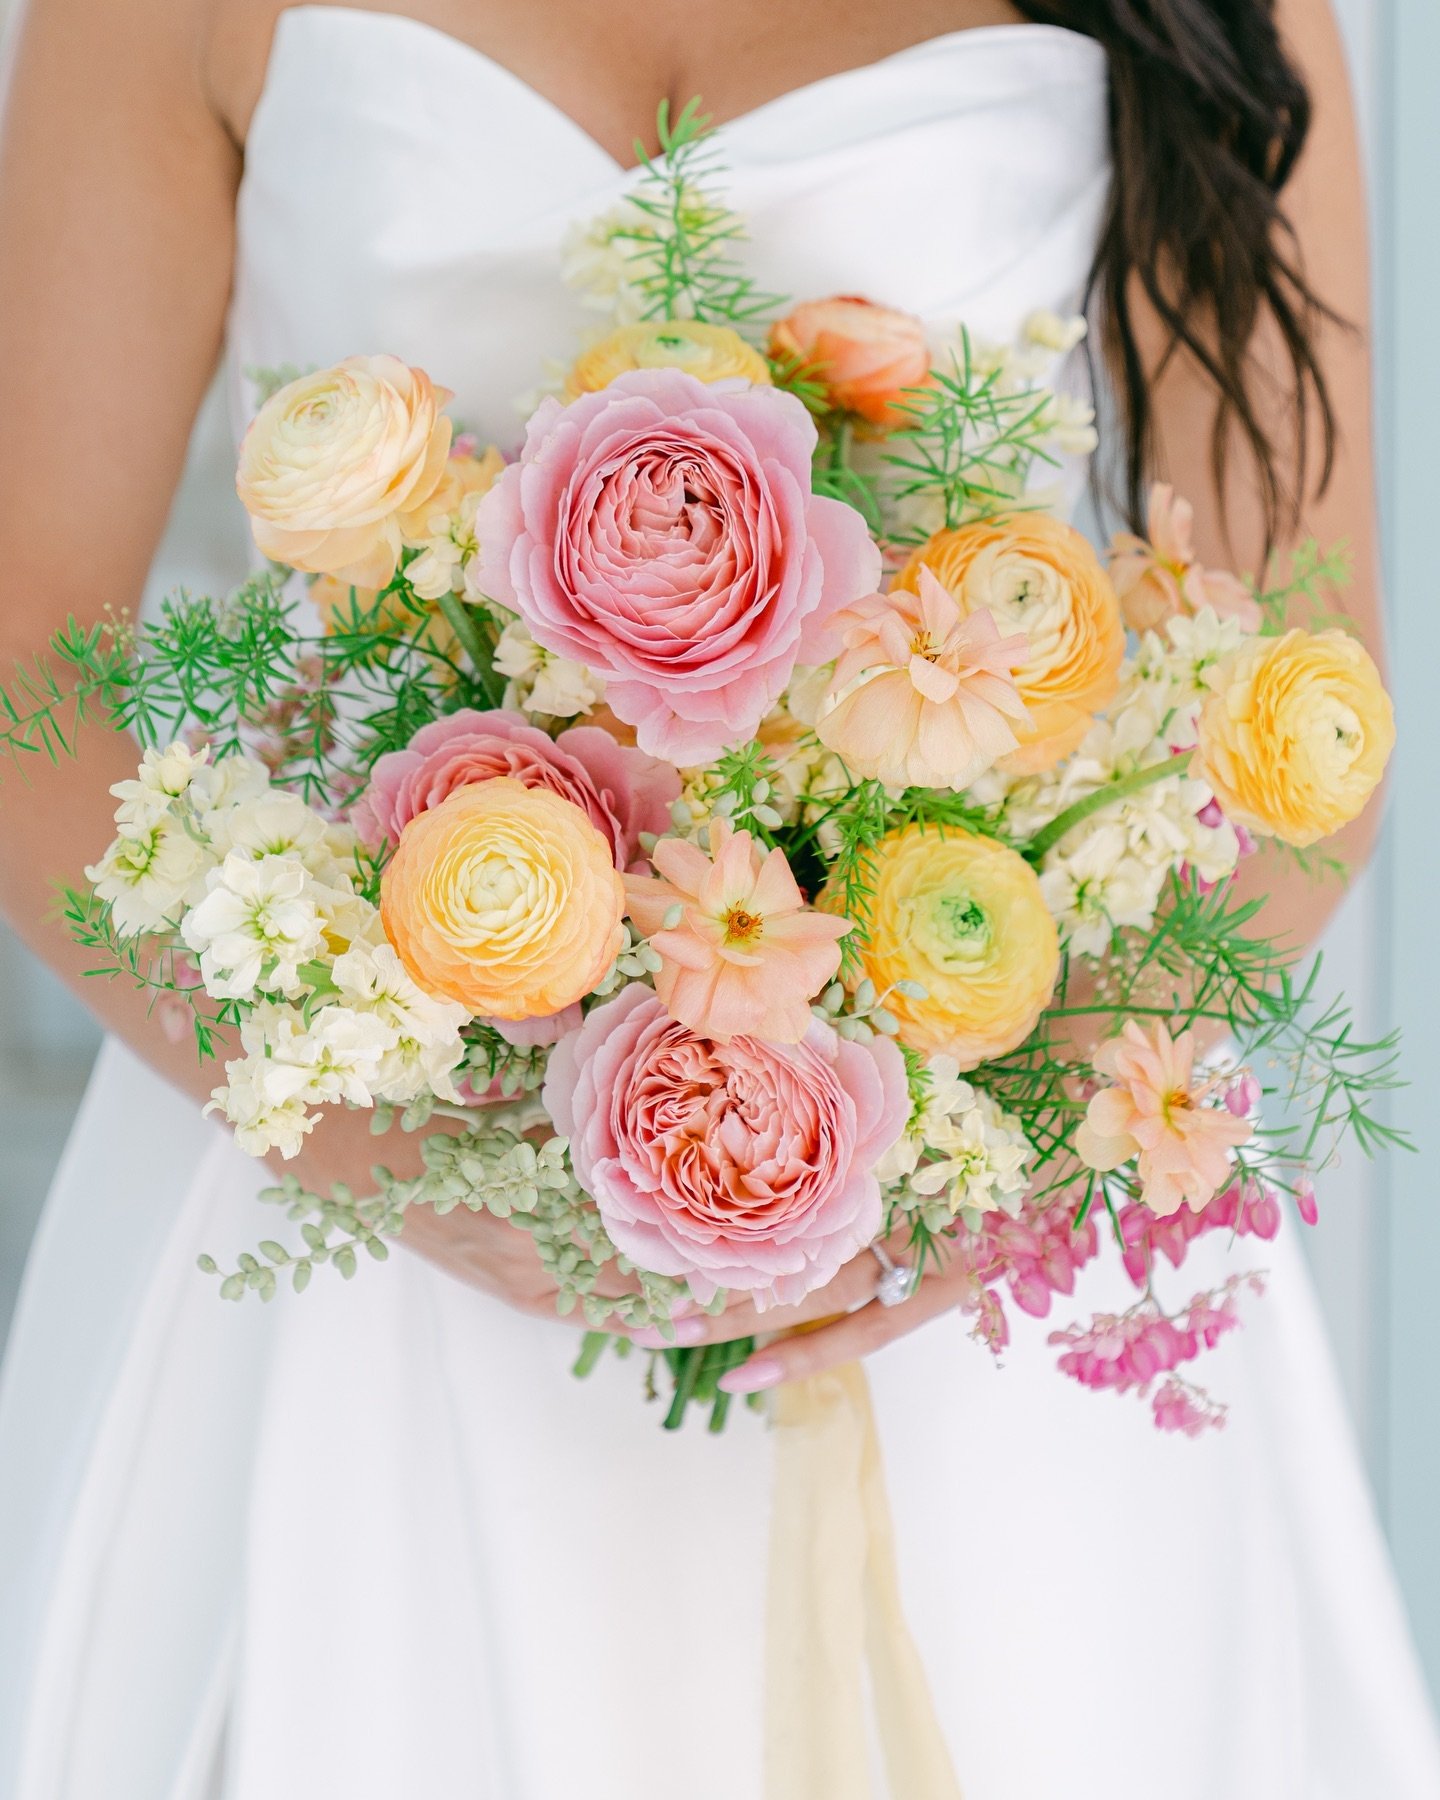 Still crushing on this bouquet from our time in Anguilla 

 Venue&nbsp;@malliouhana
Photography&nbsp;@katherineandtyler
Planning&nbsp;@getintrigued
Floral&nbsp;@moonstruckflorals
Dress&nbsp;@michaeladdisonbridal
Shoes&nbsp;@bellabelleshoes
Beauty&nbs